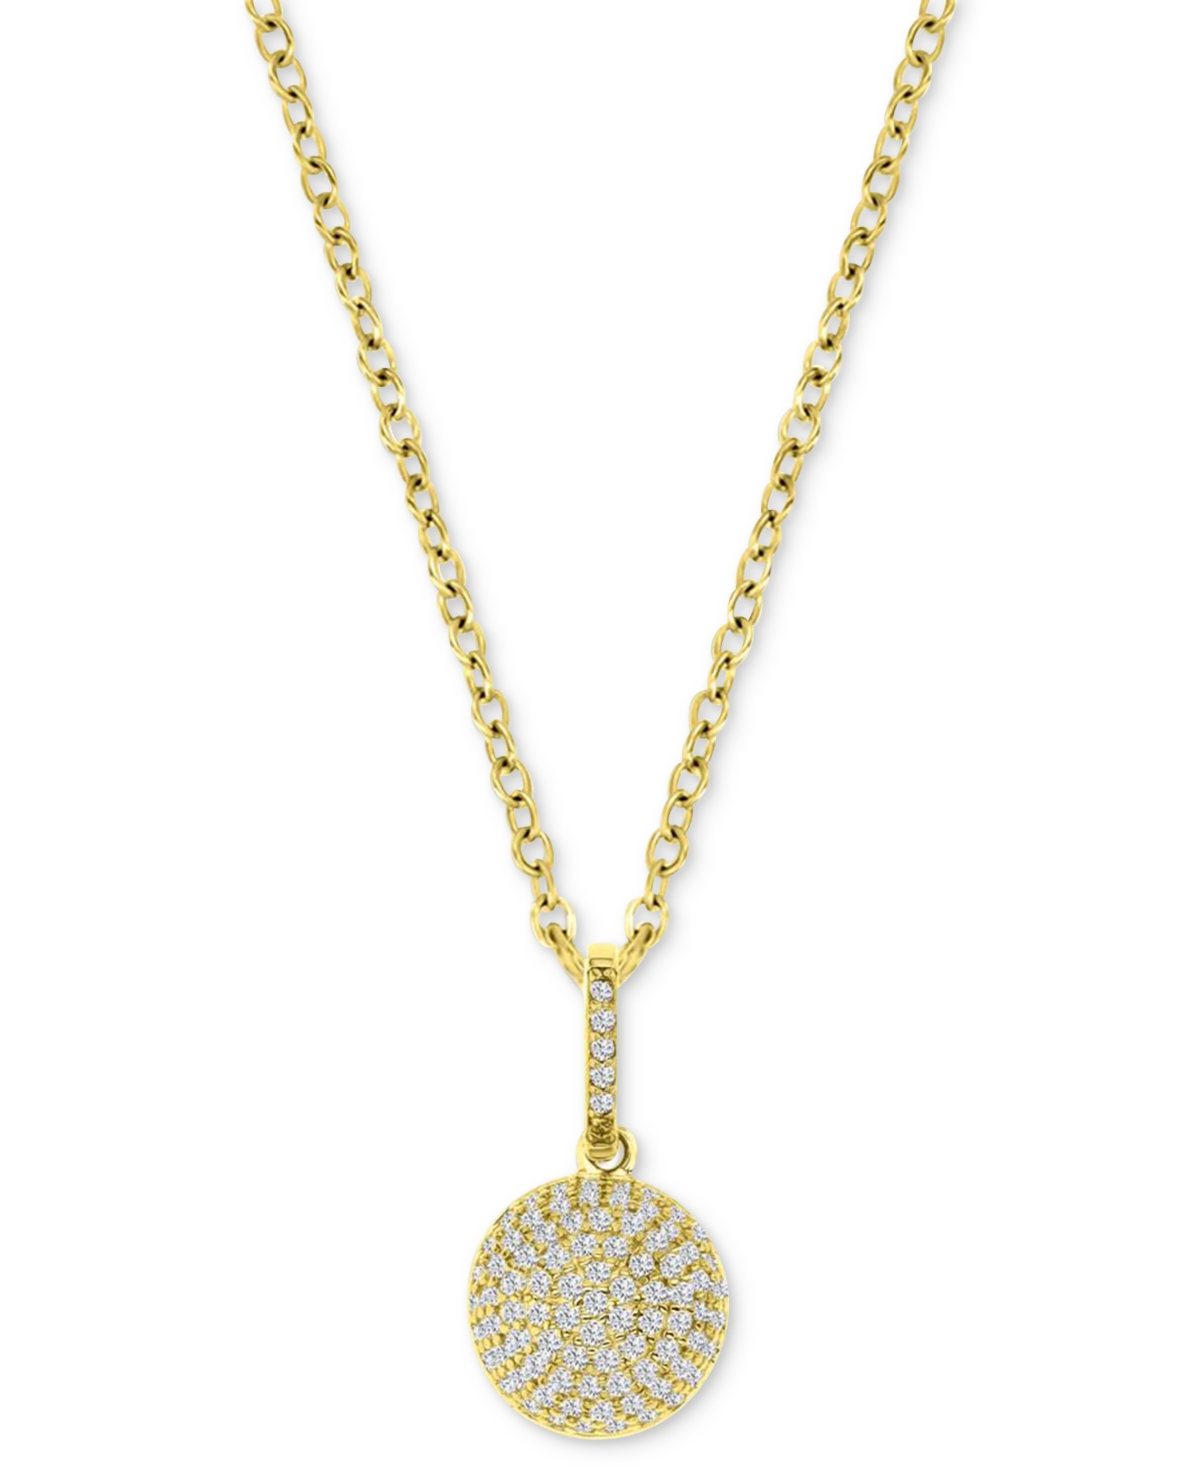 Cubic Zirconia Pave Circle Disc 18" Pendant Necklace in 14k Gold-Plated Sterling Silver - Gold